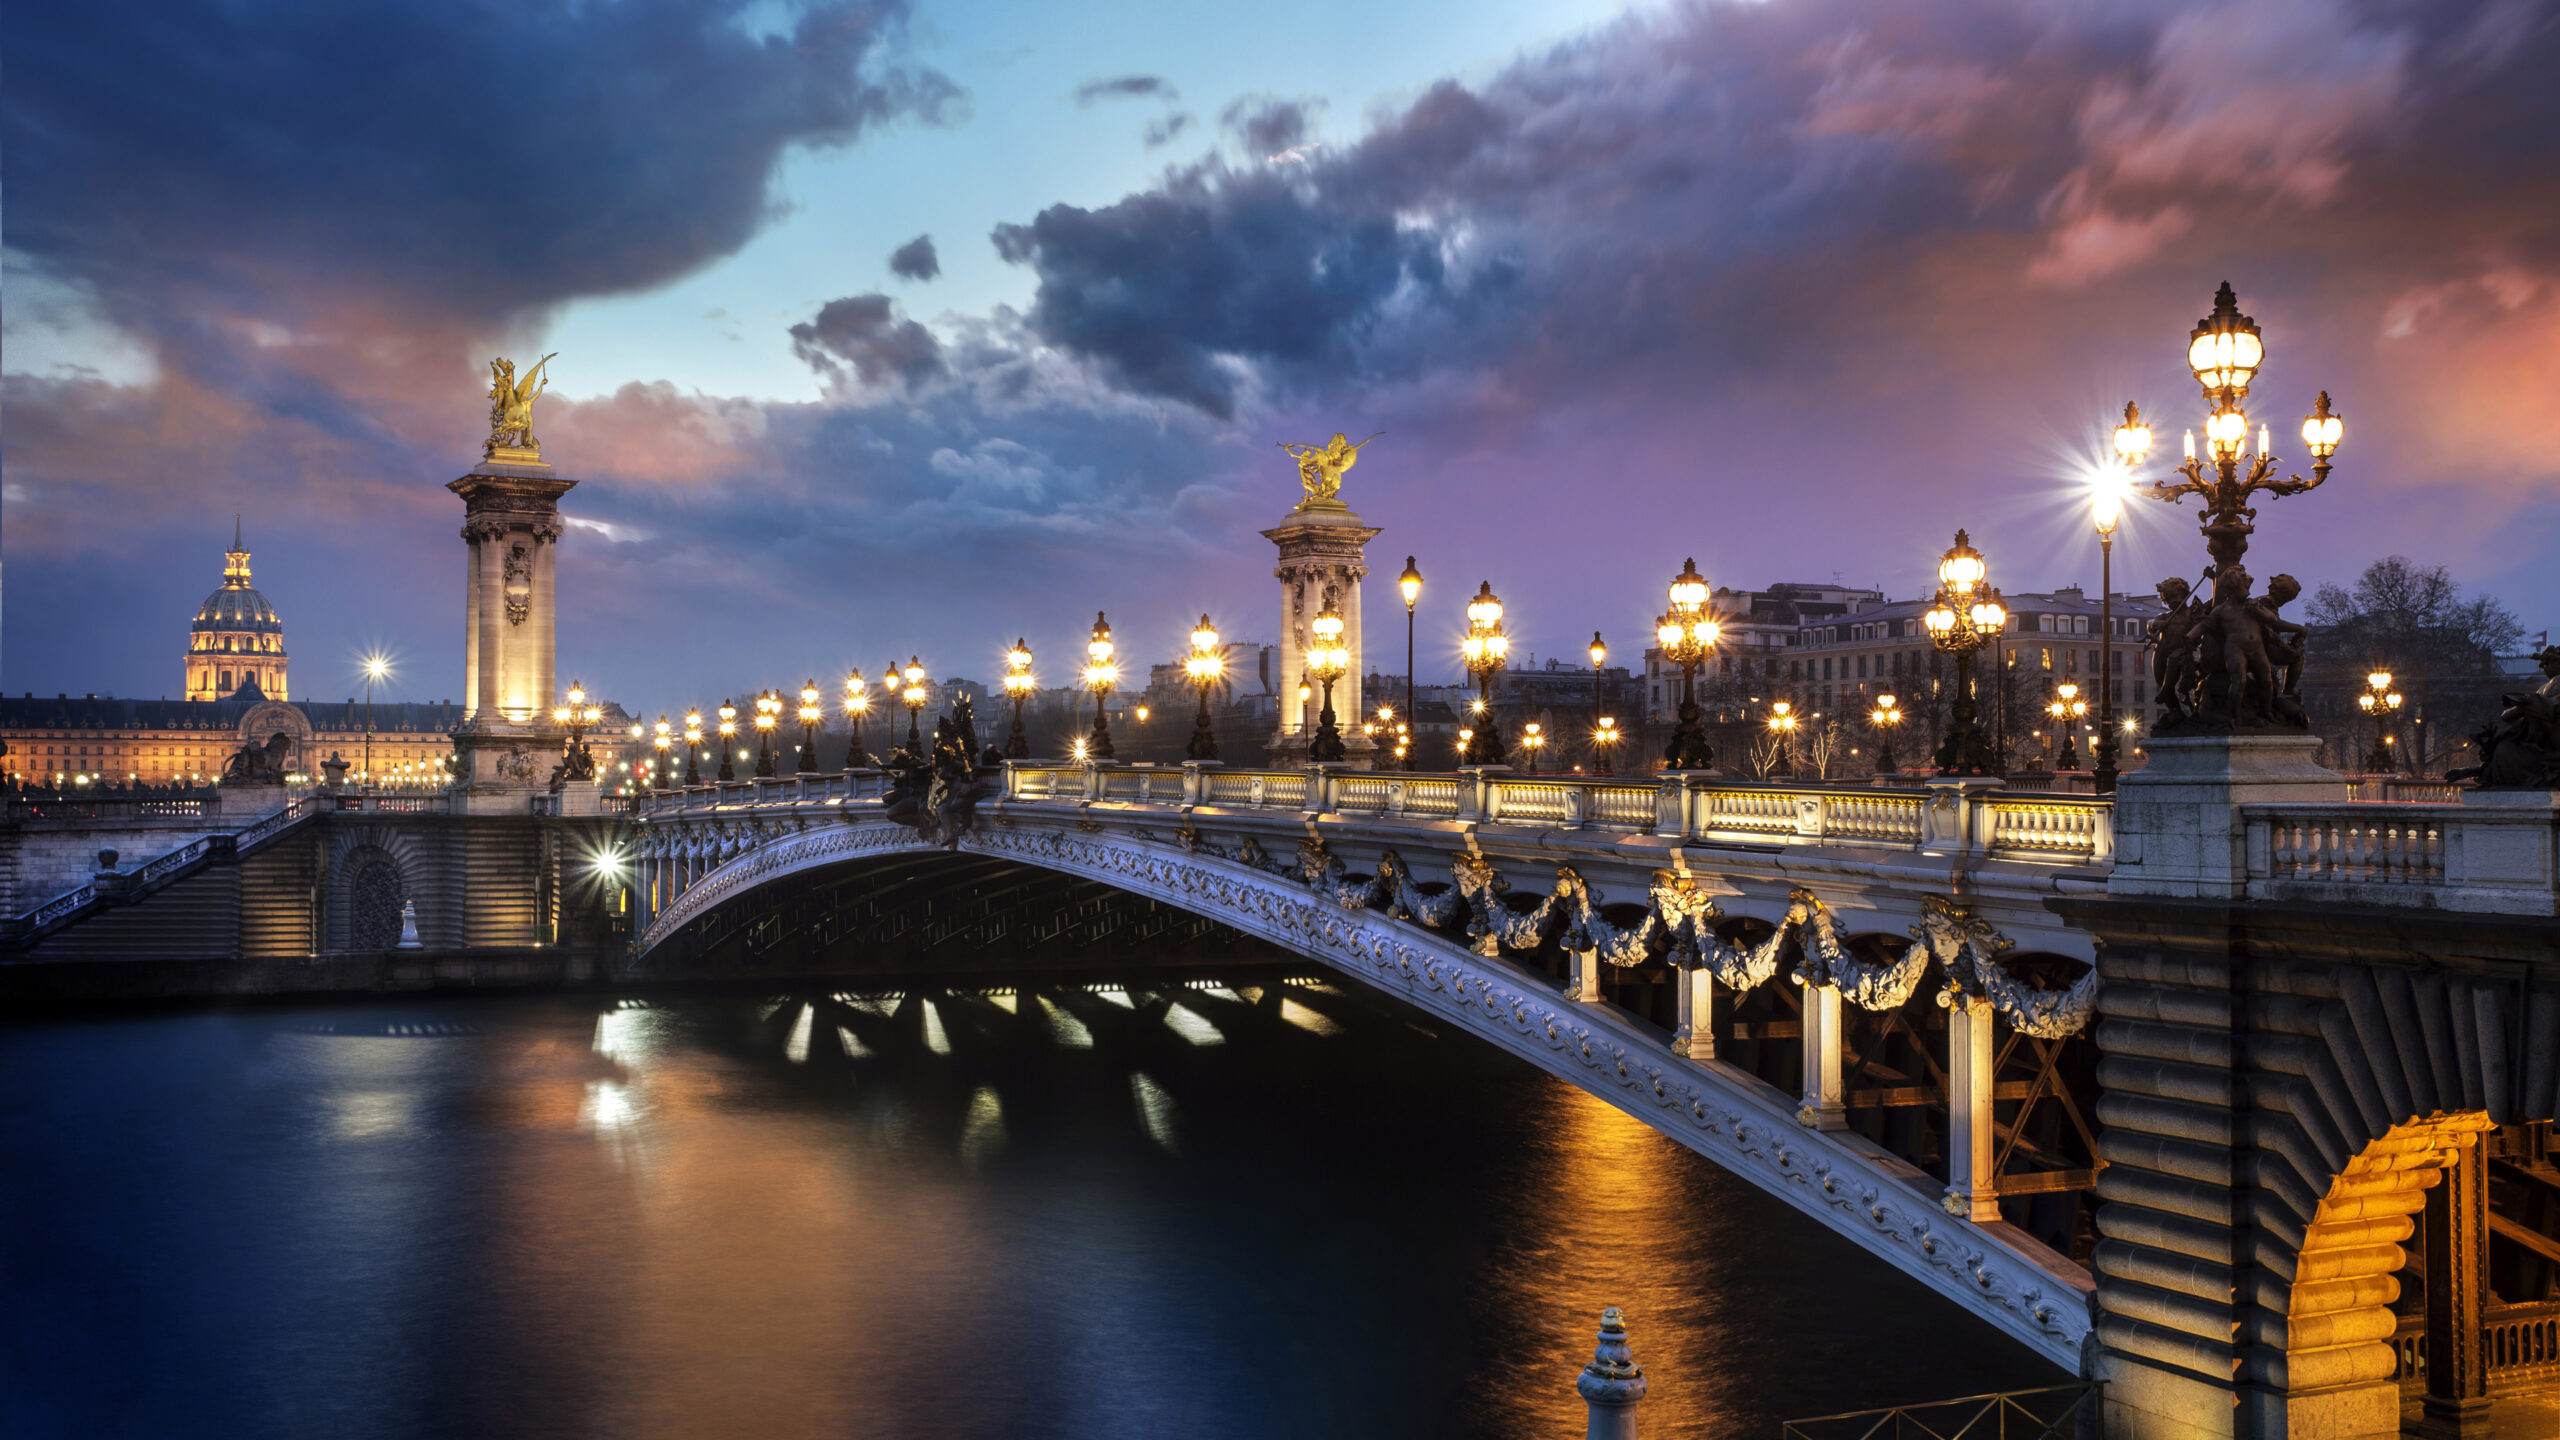 bridge_of_alexander_with_lights_france_paris_with_background_of_clouds_and_sky_4k_5k_hd_travel